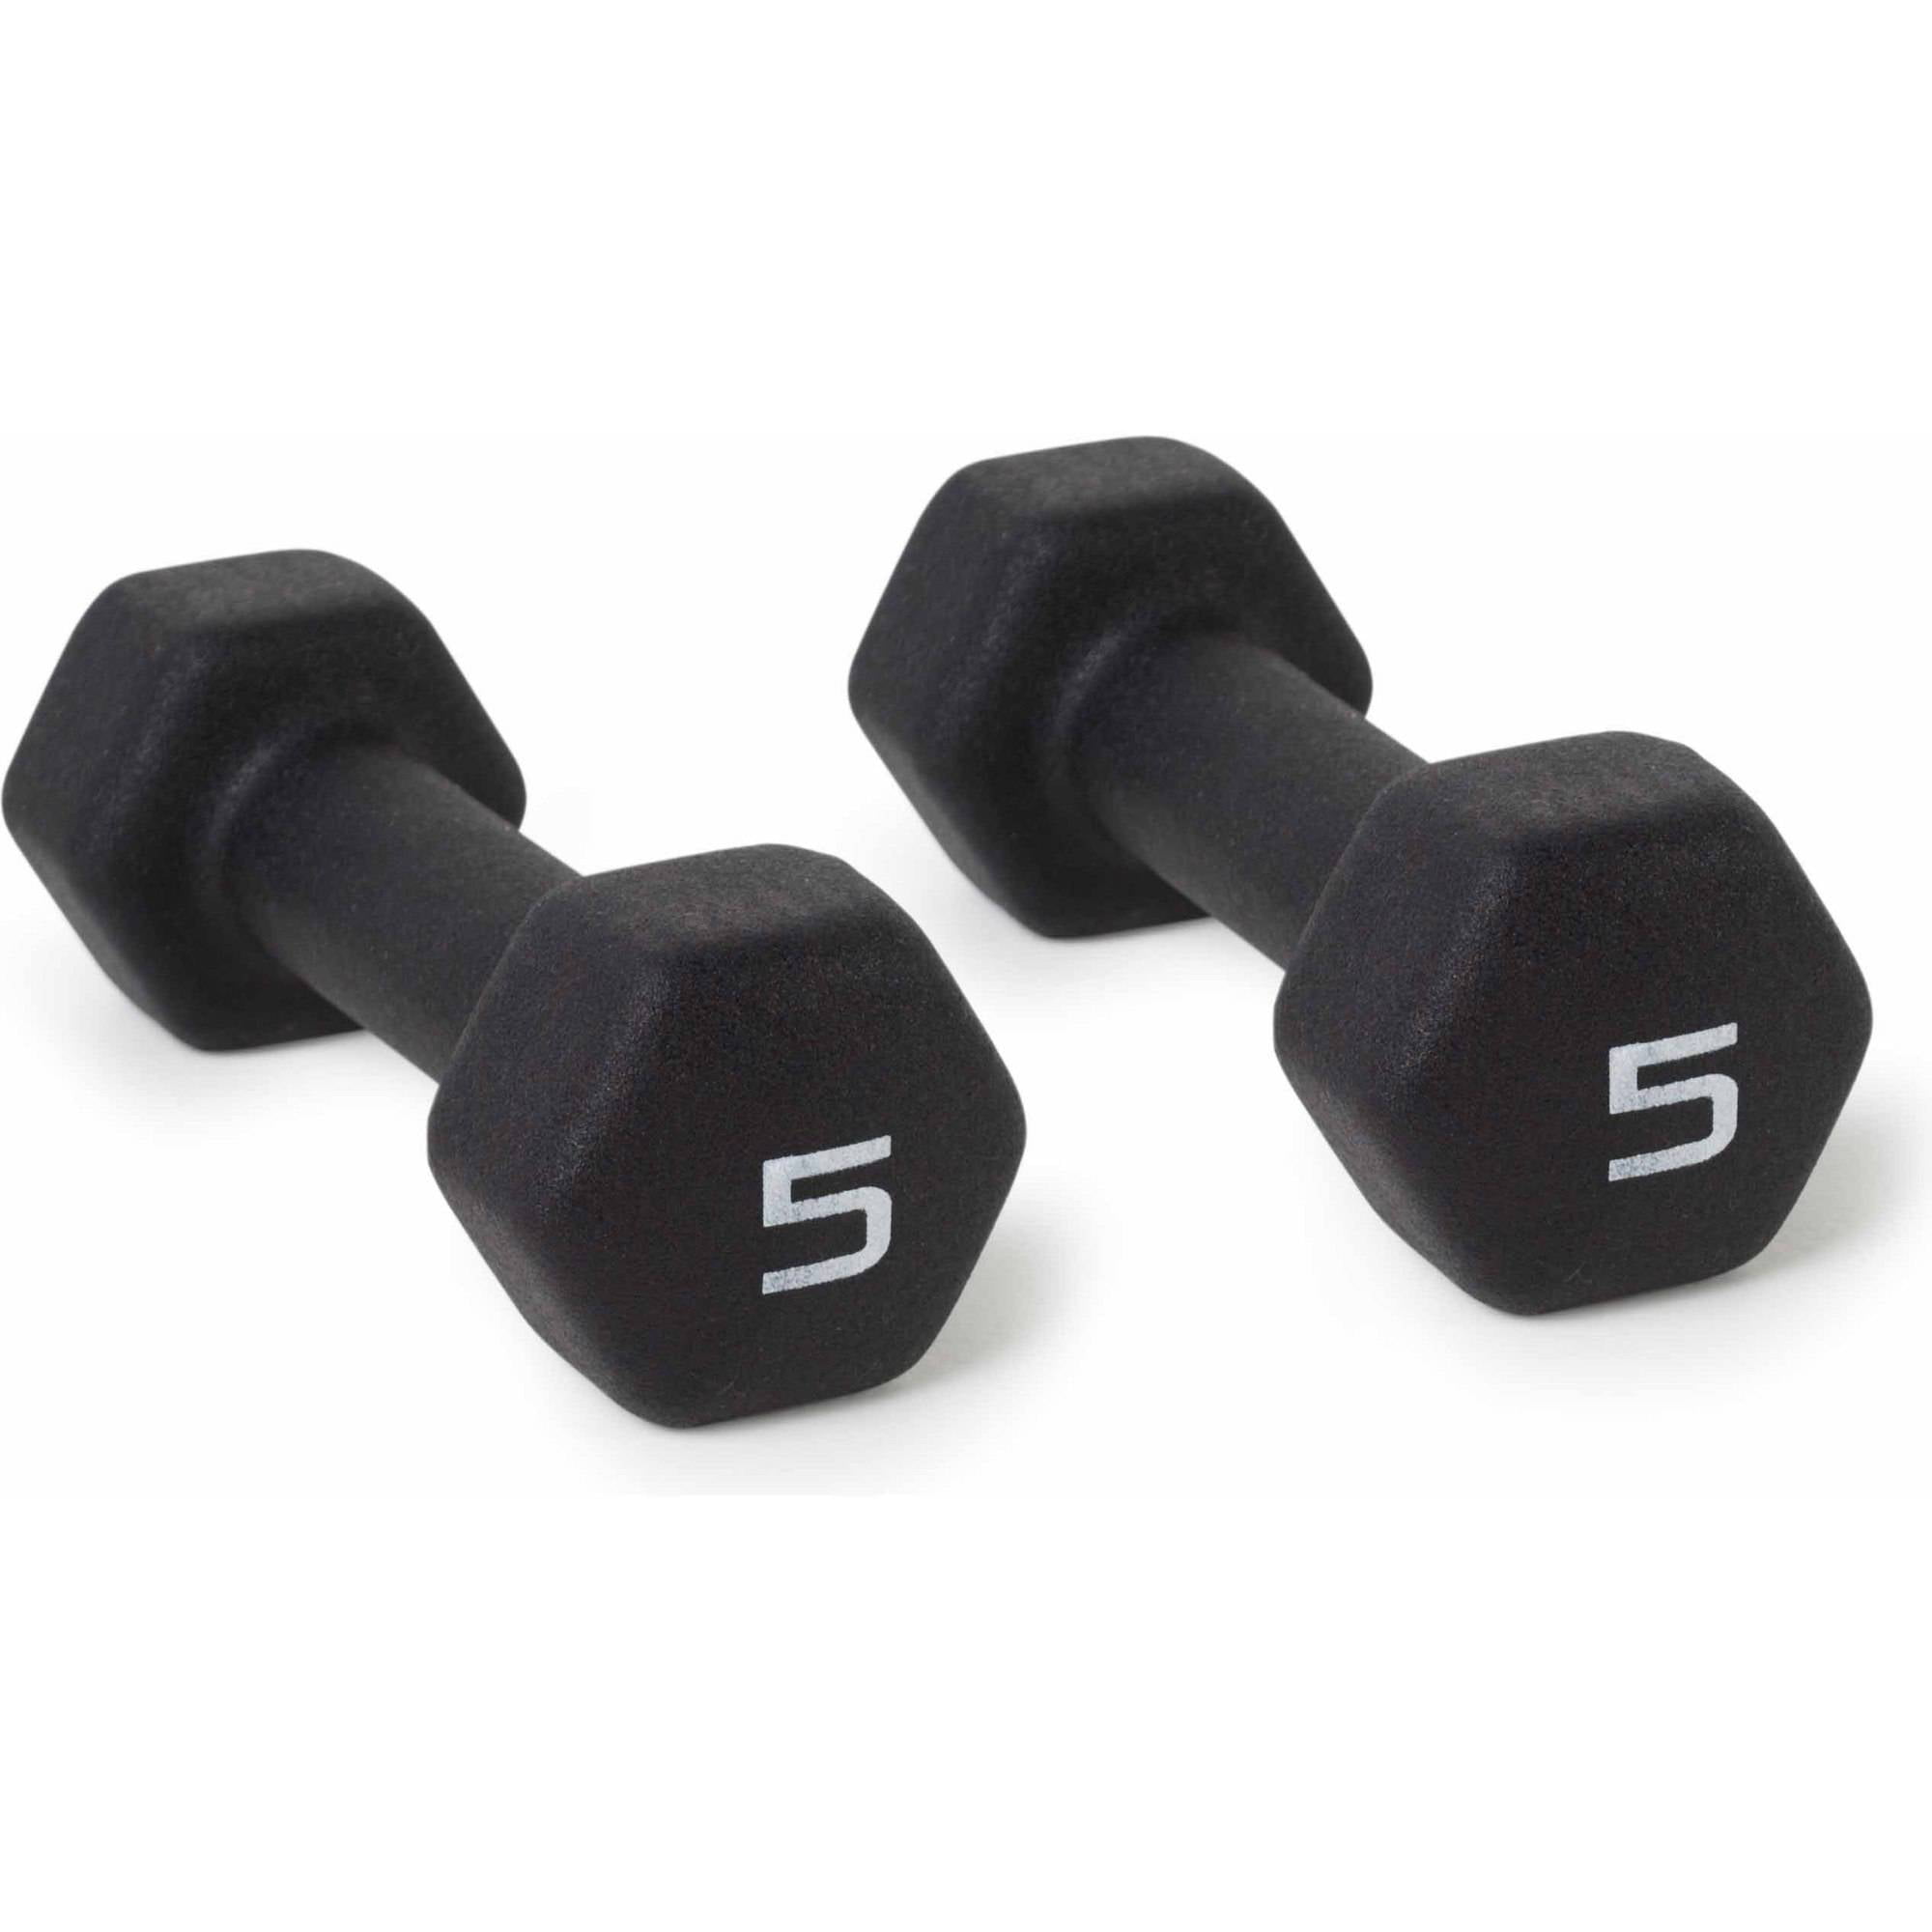 6LB Total Everlast FIT Pair Hand Weights 